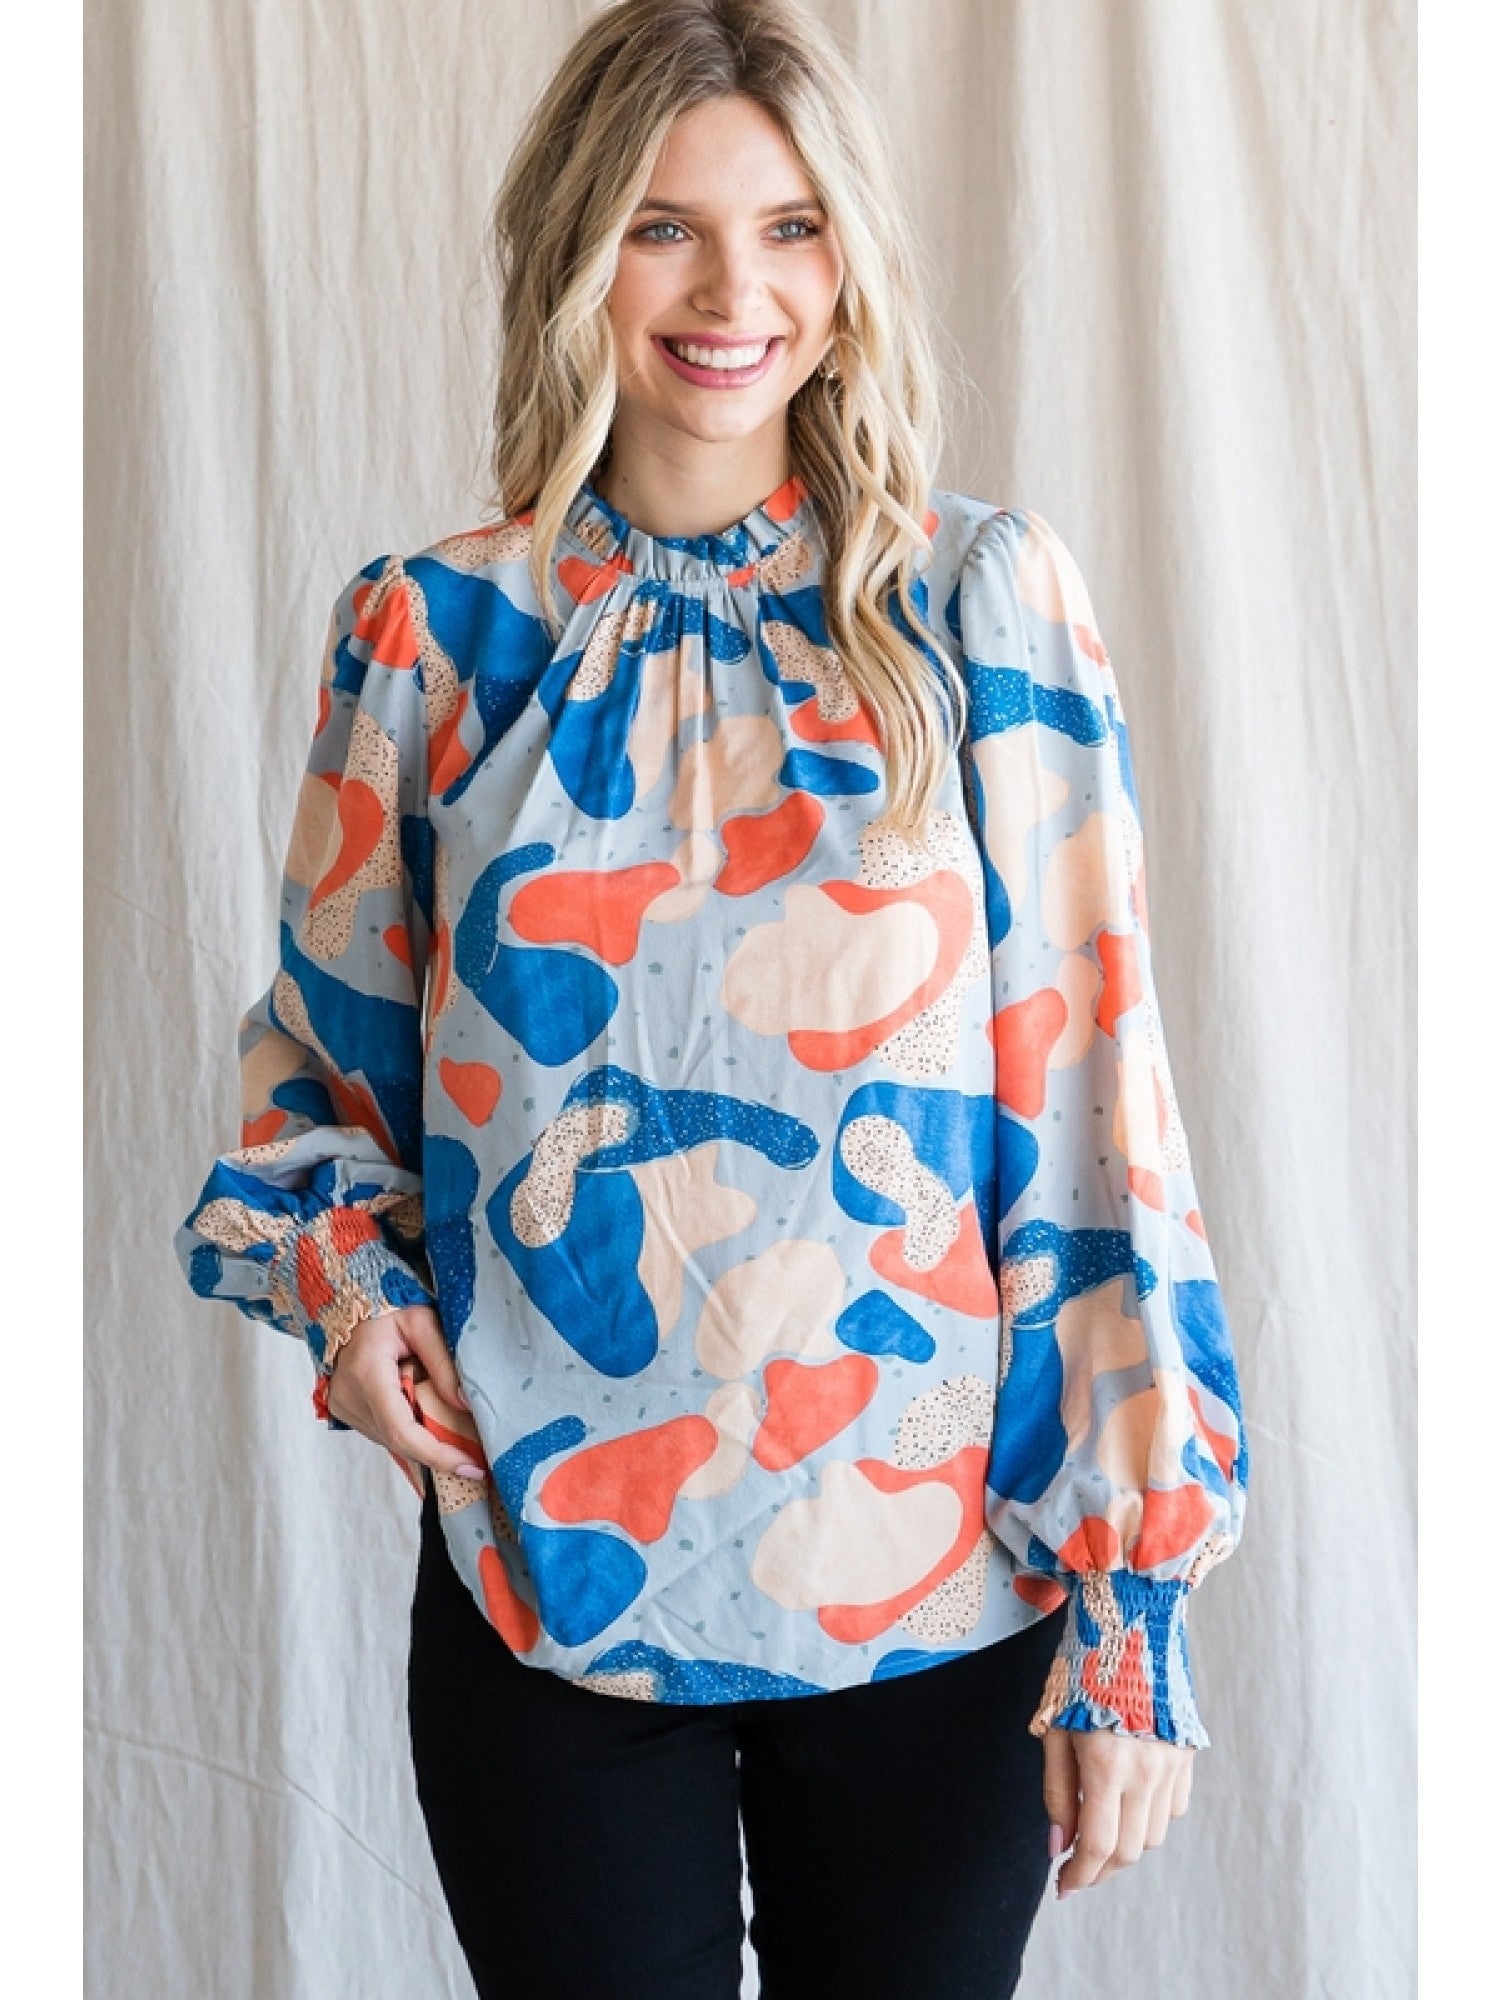 Rubies + Lace | Sky Blue & Clementine Print | Frill Neck Blouse -